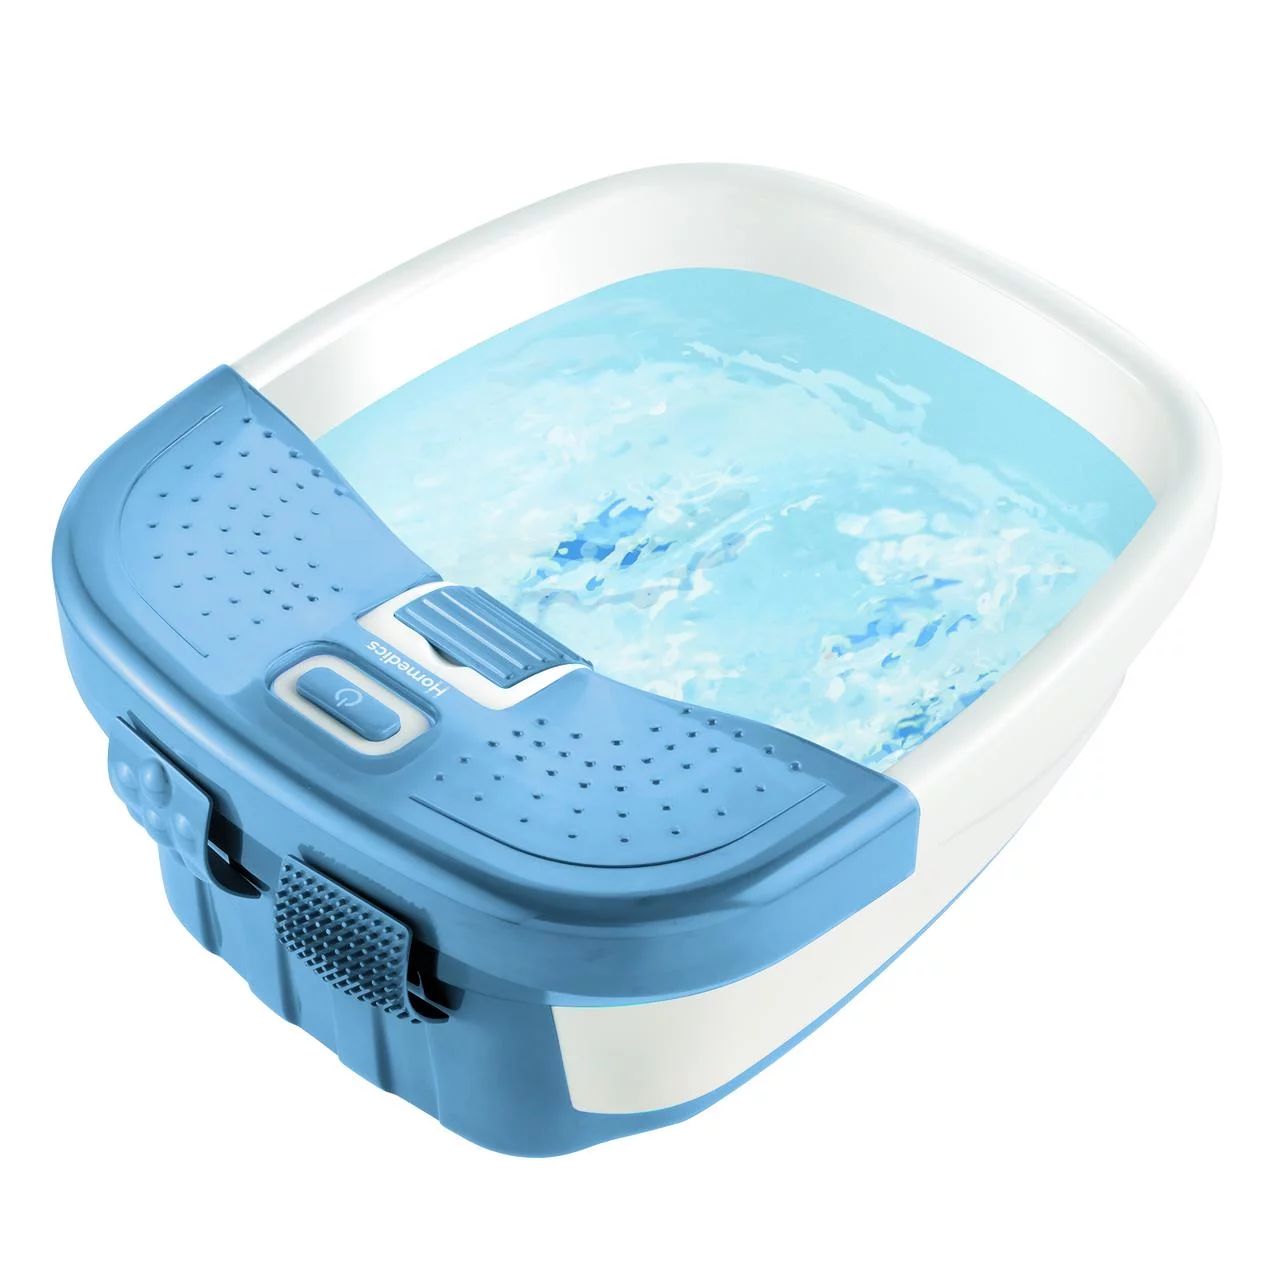 Homedics Bubble Bliss® Deluxe Foot Spa Surrounds Your Feet with Massaging Bubbles - Blue | Walmart (US)